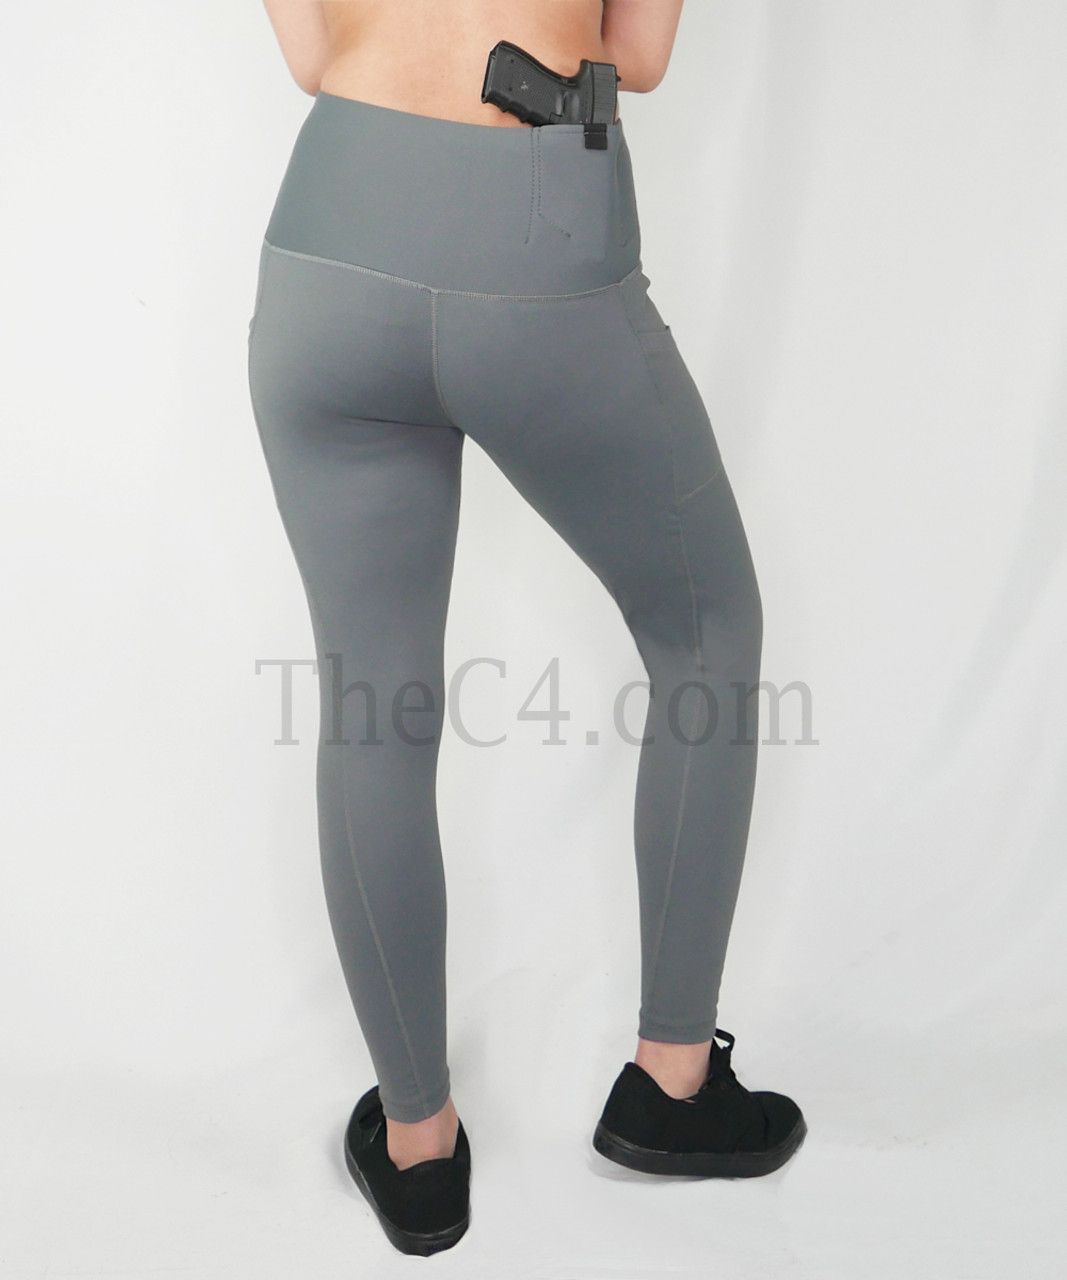 Black Concealed Carry Leggings- Right Hand Only - C4